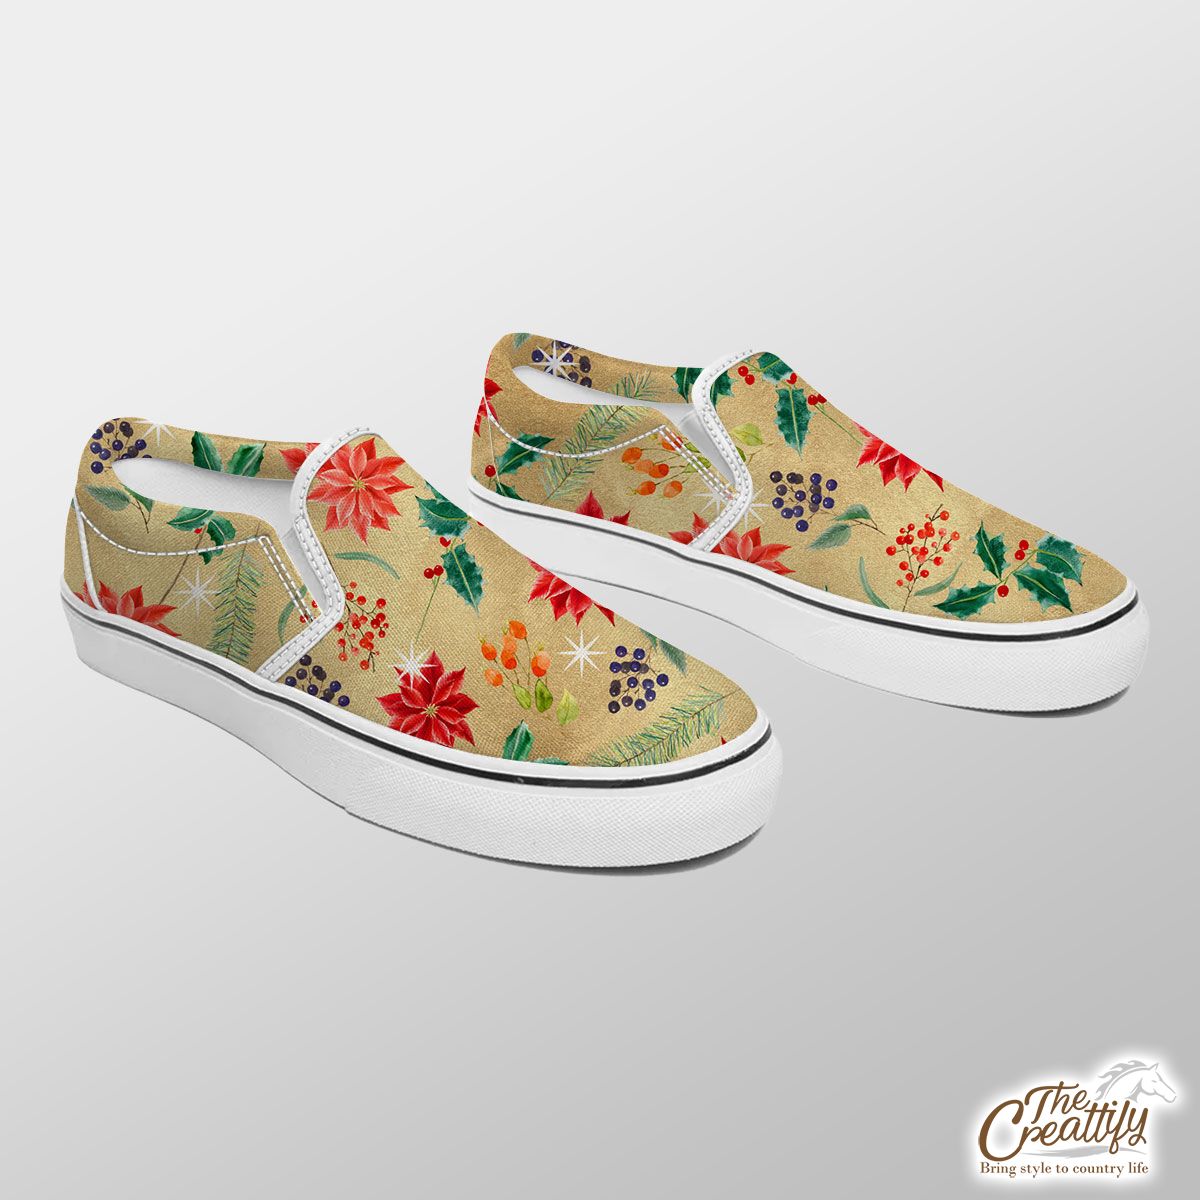 Christmas Poinsettia, Holly Leaf, Holly Berries And Christmas Mistletoe Slip On Sneakers